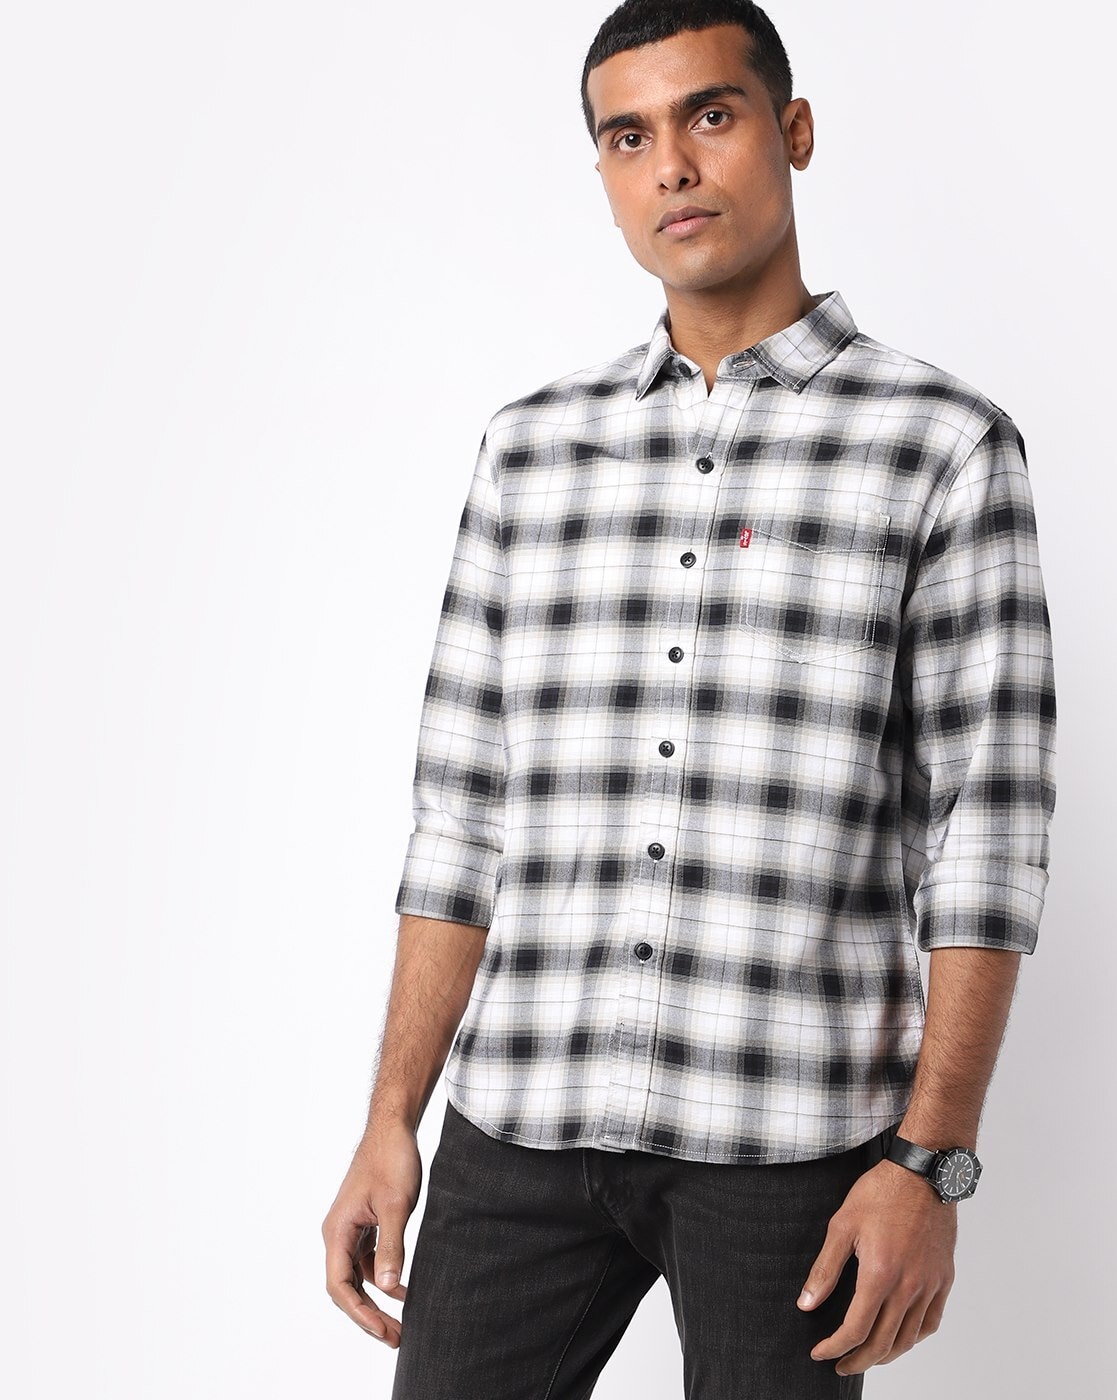 Buy White & Black Shirts for Men by LEVIS Online 